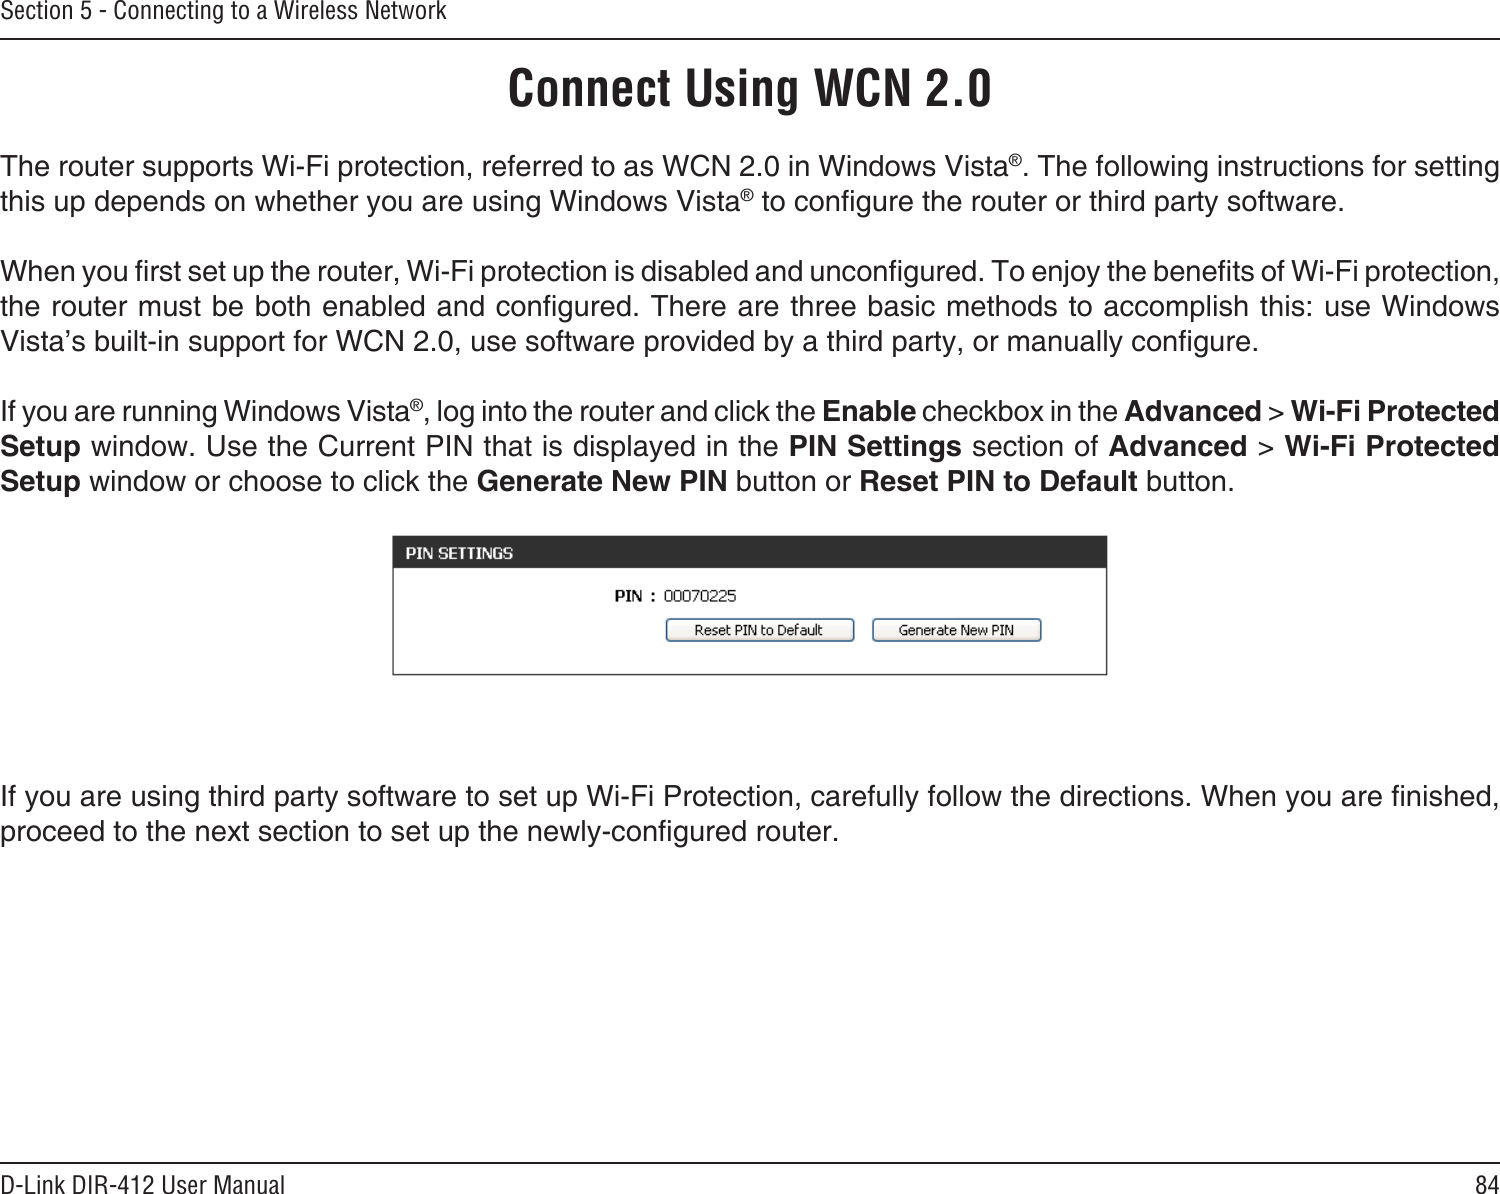 84D-Link DIR-412 User ManualSection 5 - Connecting to a Wireless NetworkConnect Using WCN 2.0The router supports Wi-Fi protection, referred to as WCN 2.0 in Windows Vista®. The following instructions for setting this up depends on whether you are using Windows Vista® to congure the router or third party software.        When you rst set up the router, Wi-Fi protection is disabled and uncongured. To enjoy the benets of Wi-Fi protection, the router must be both enabled and congured. There are three basic methods to accomplish this: use Windows Vista’s built-in support for WCN 2.0, use software provided by a third party, or manually congure. If you are running Windows Vista®, log into the router and click the Enable checkbox in the Advanced &gt; Wi-Fi Protected Setup window. Use the Current PIN that is displayed in the PIN Settings section of Advanced &gt; Wi-Fi Protected Setup window or choose to click the Generate New PIN button or Reset PIN to Default button. If you are using third party software to set up Wi-Fi Protection, carefully follow the directions. When you are nished, proceed to the next section to set up the newly-congured router. 